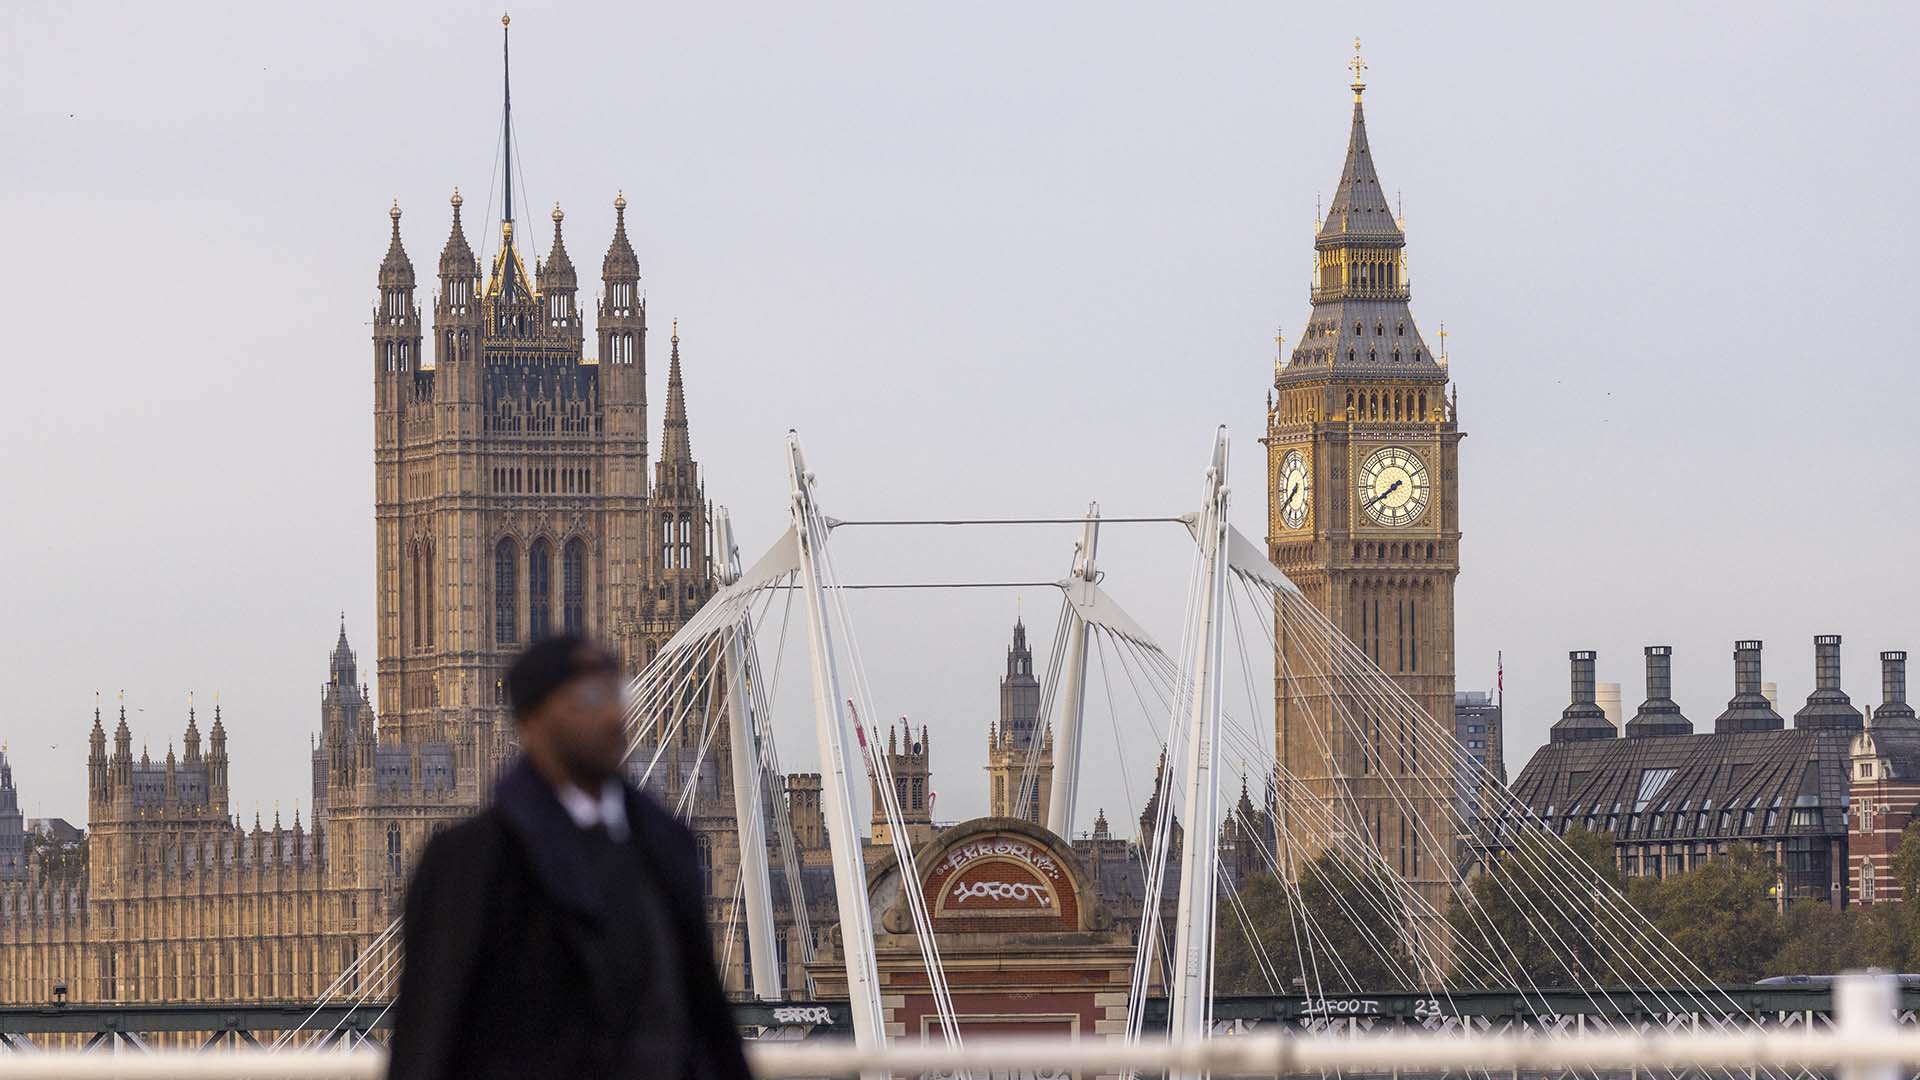 A commuter crosses Waterloo Bridge in view of the Houses of Parliament in London